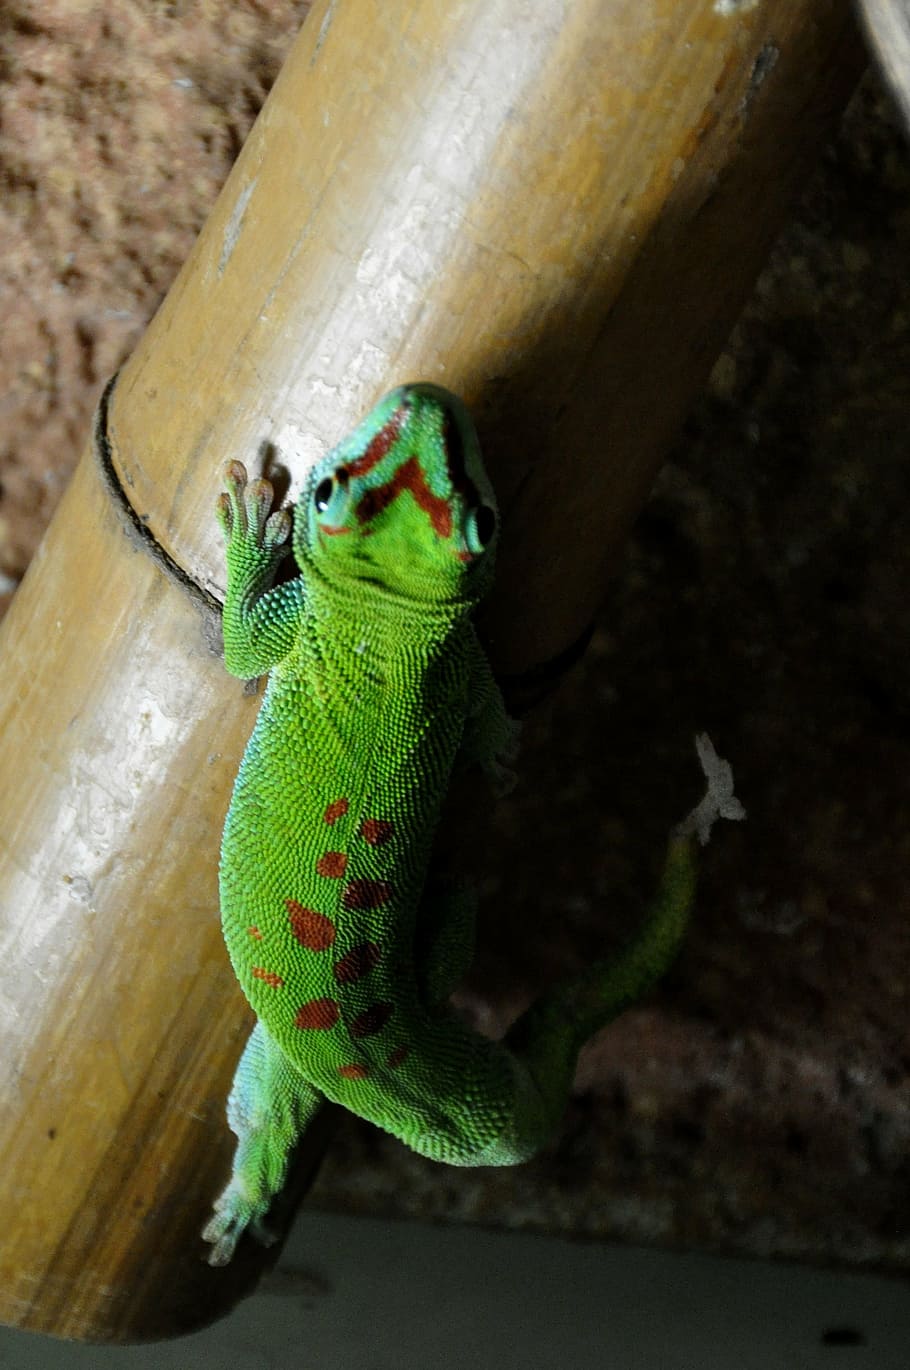 day gecko, malagasy taggecko, gecko, reptile, green, red, lizard, animal, nature, wildlife